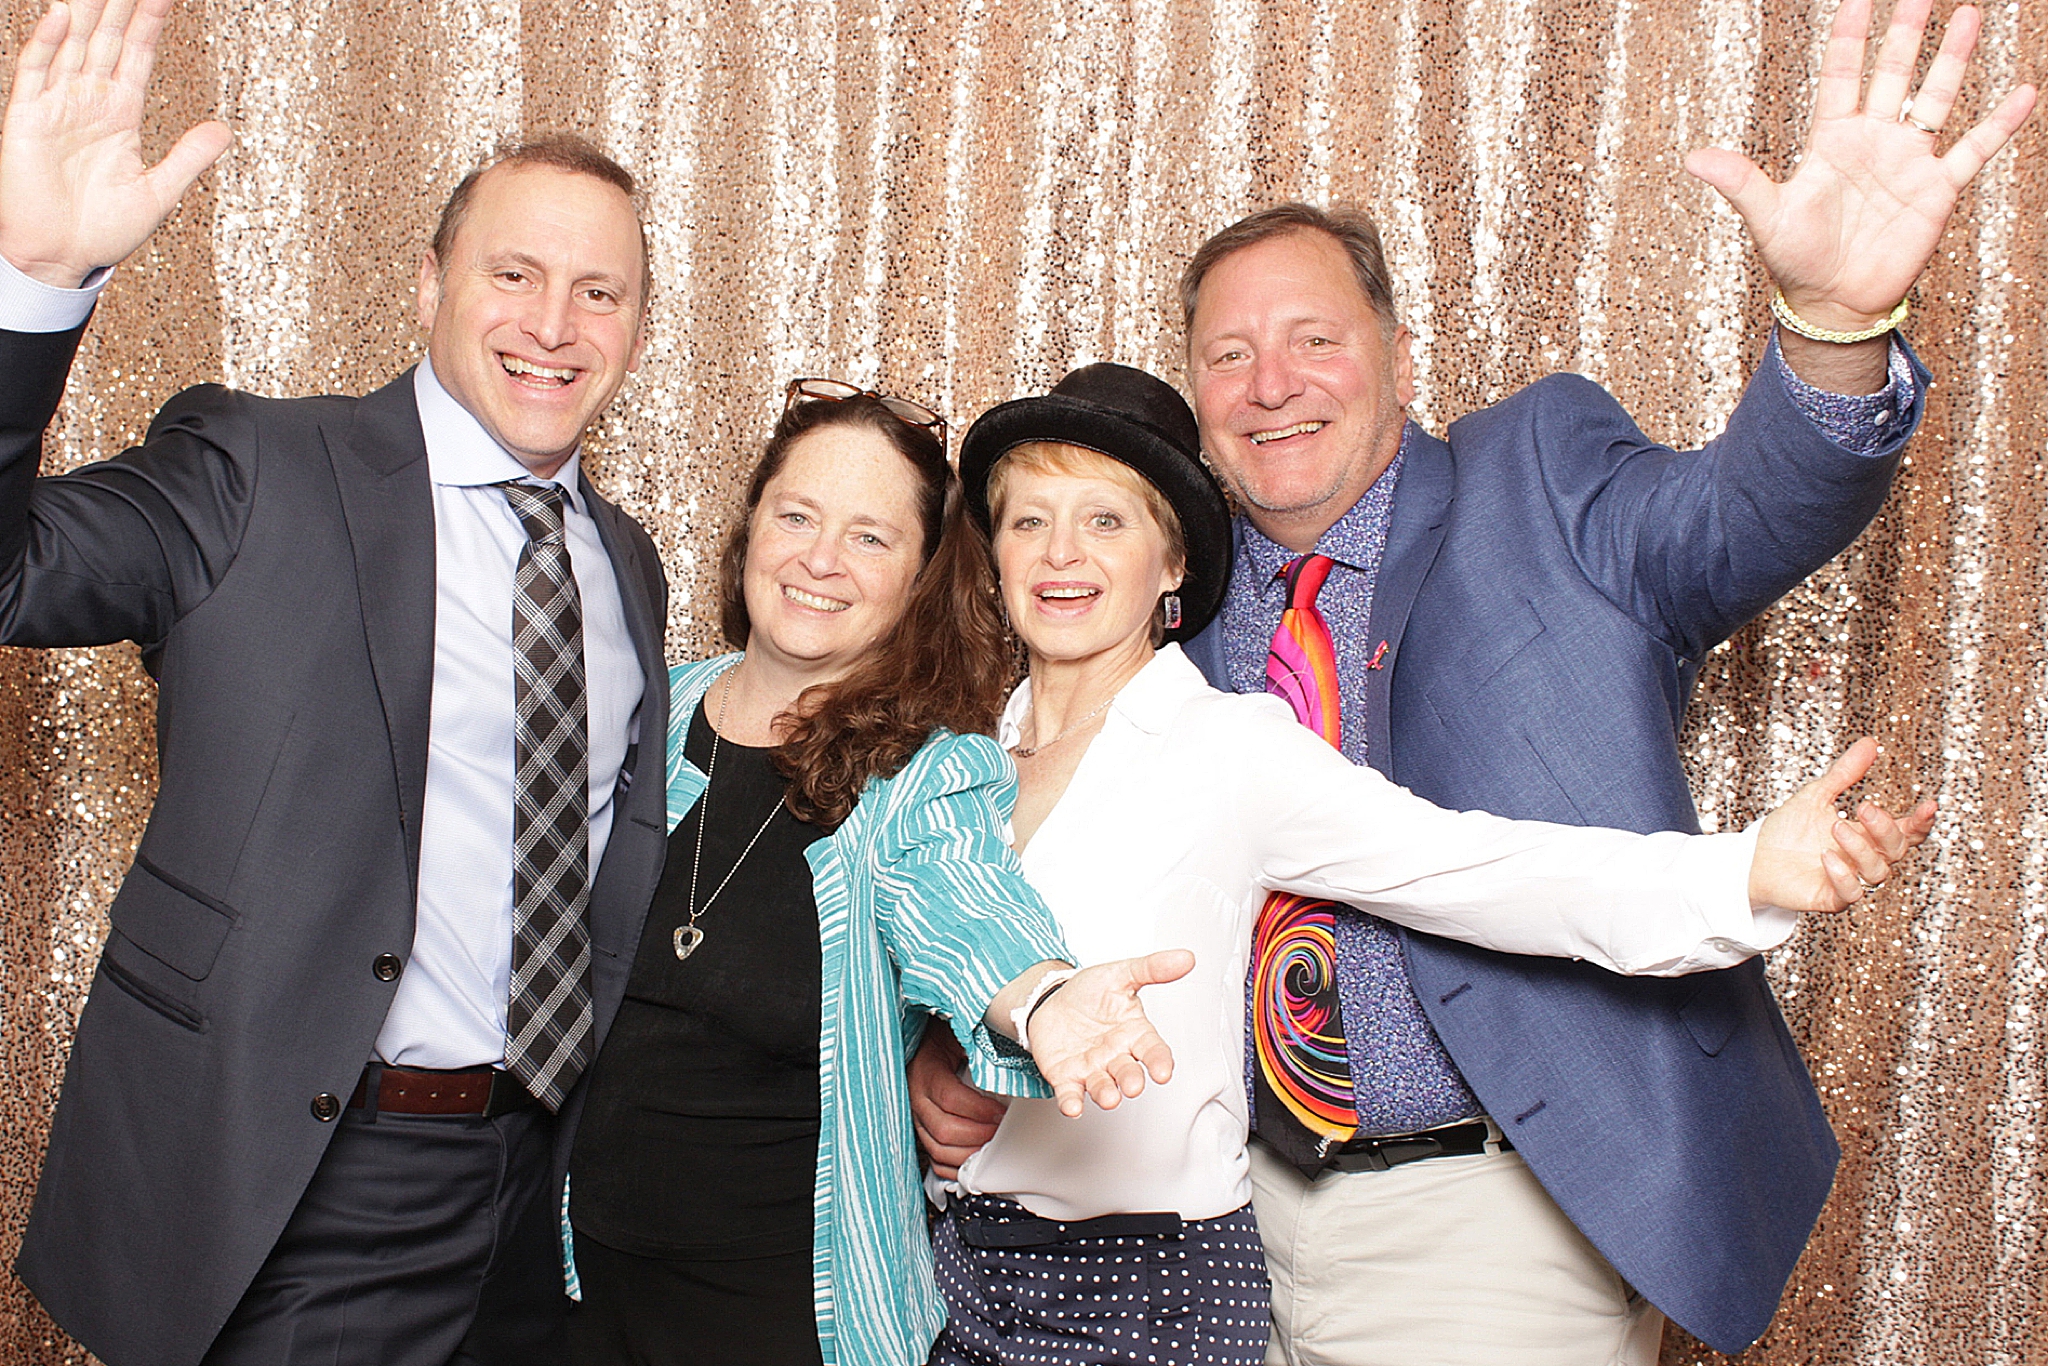 wedding guests pose in photo booth from Idalia Photography